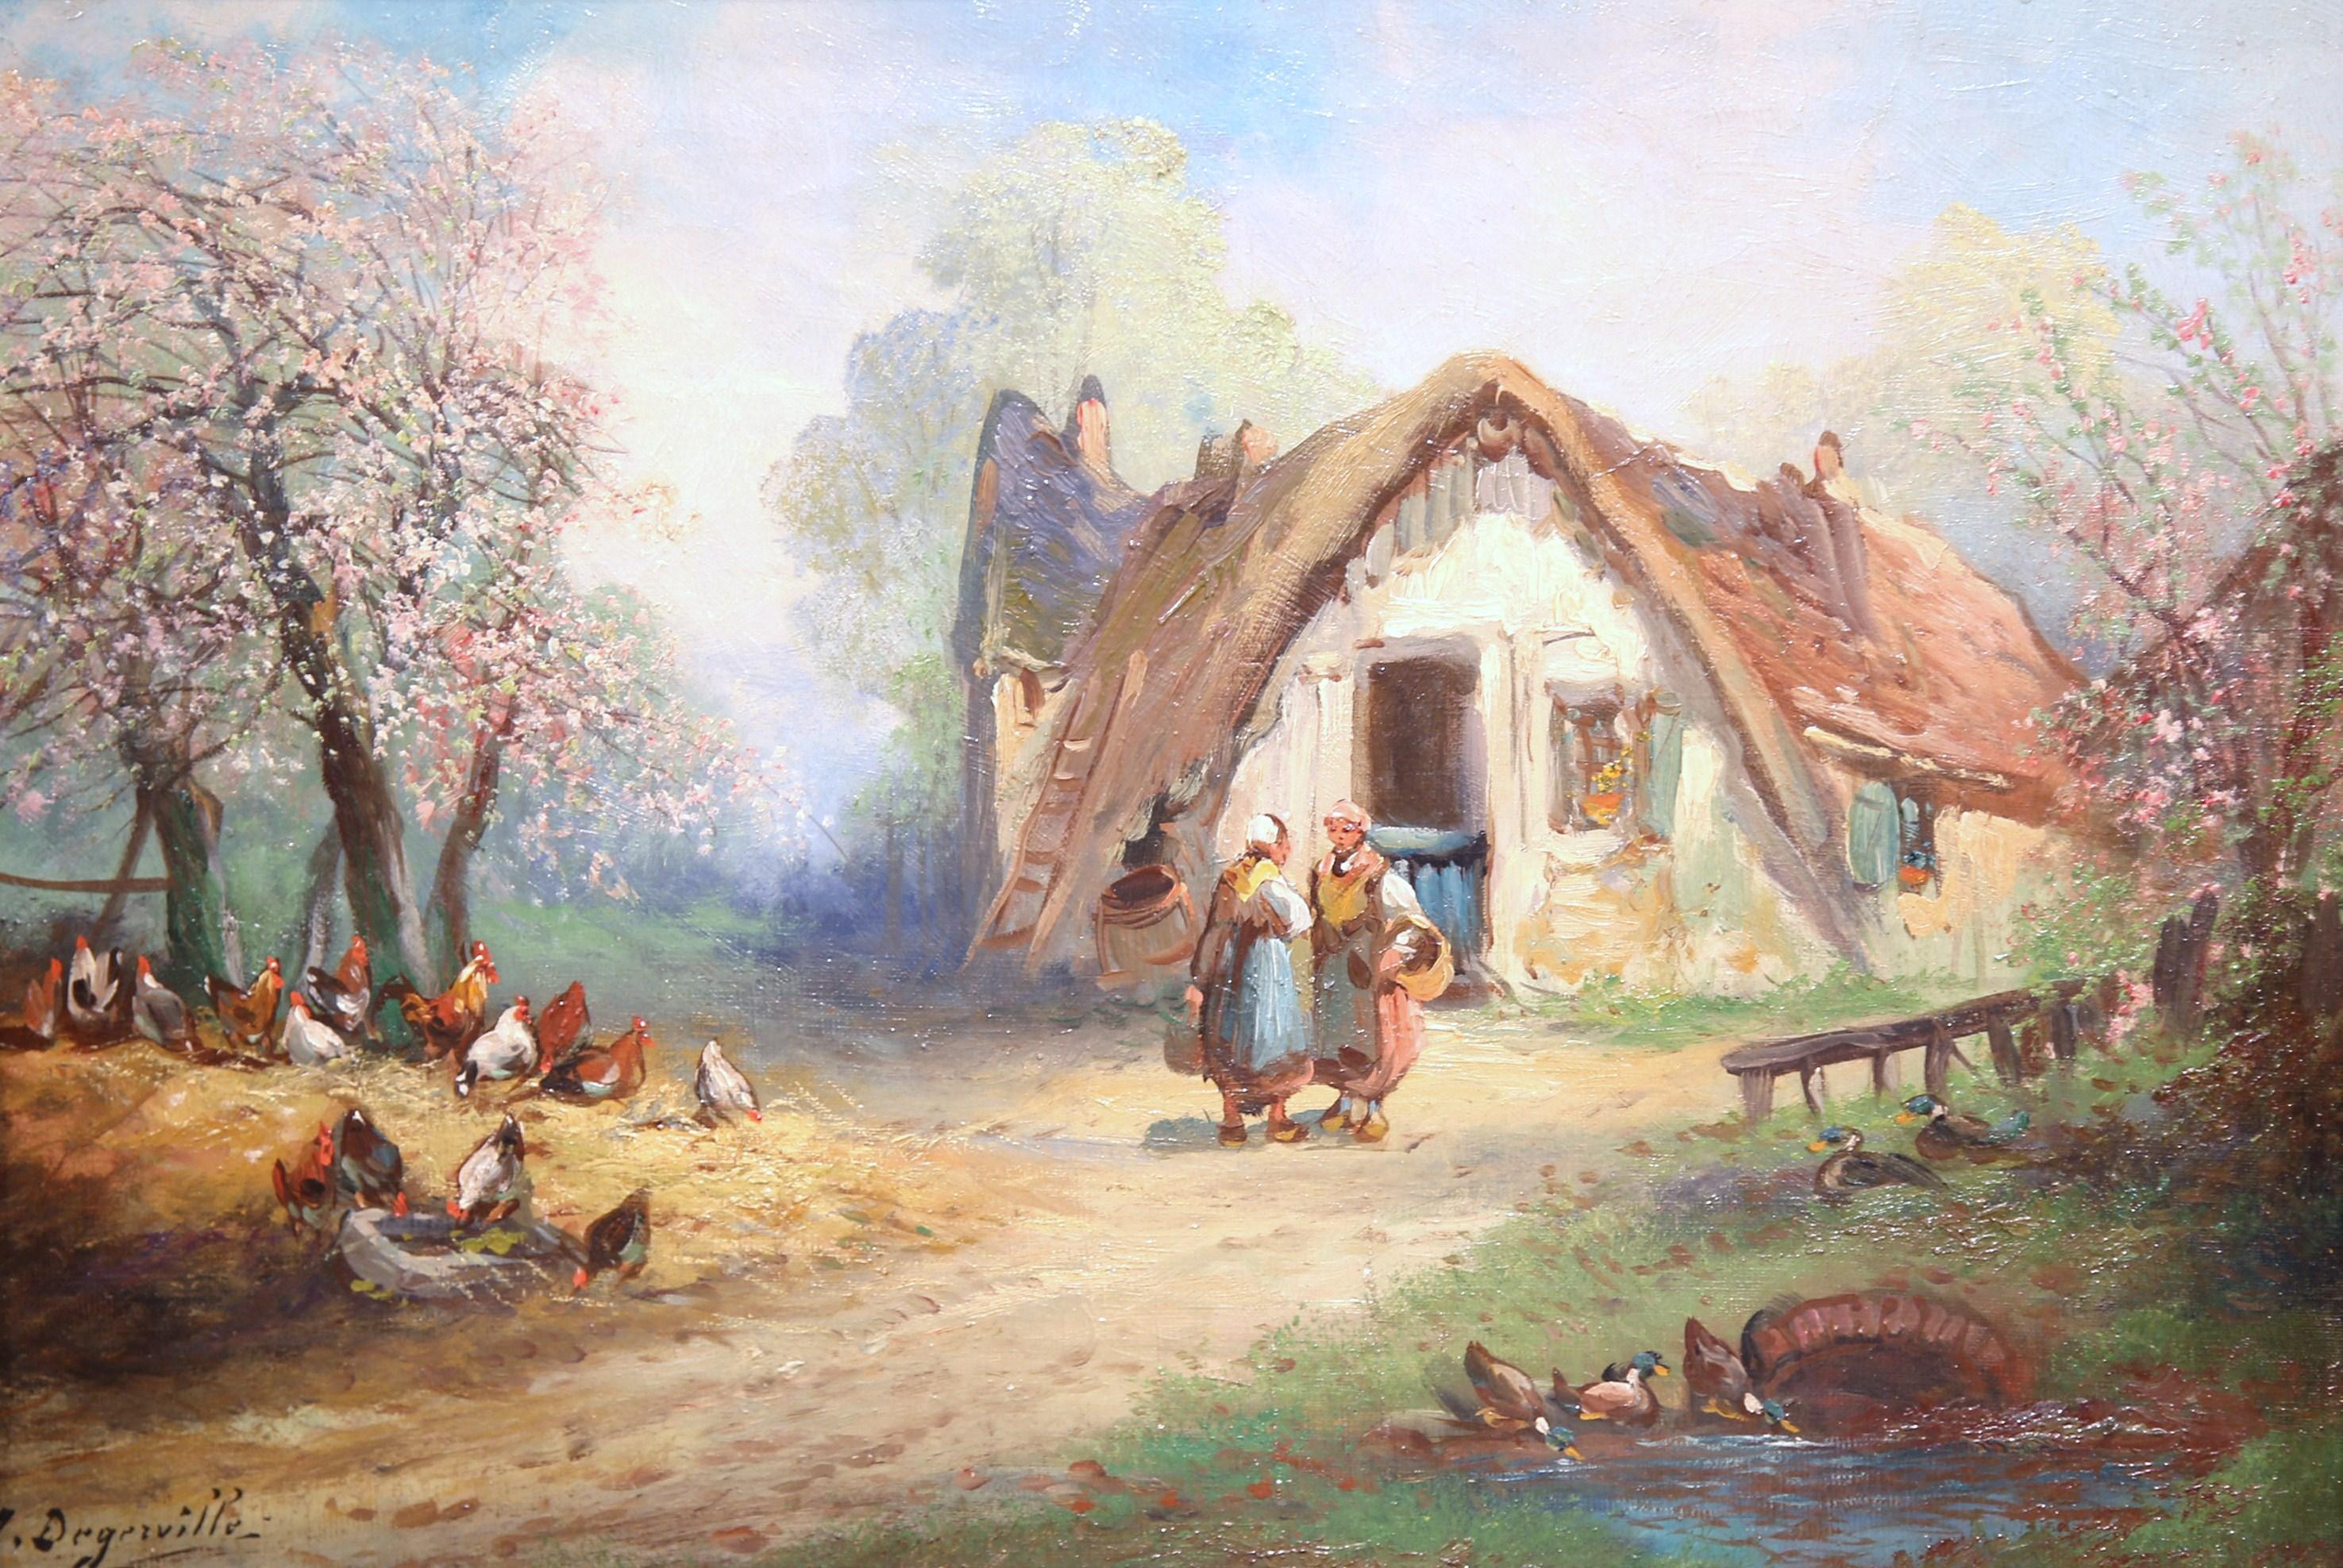 This bucolic, antique oil on canvas painting was created in France circa 1860. Set in the original carved gilt frame, the artwork depicts a country scene with farm people, a pond and chickens grazing. The picturesque landscape is signed on the